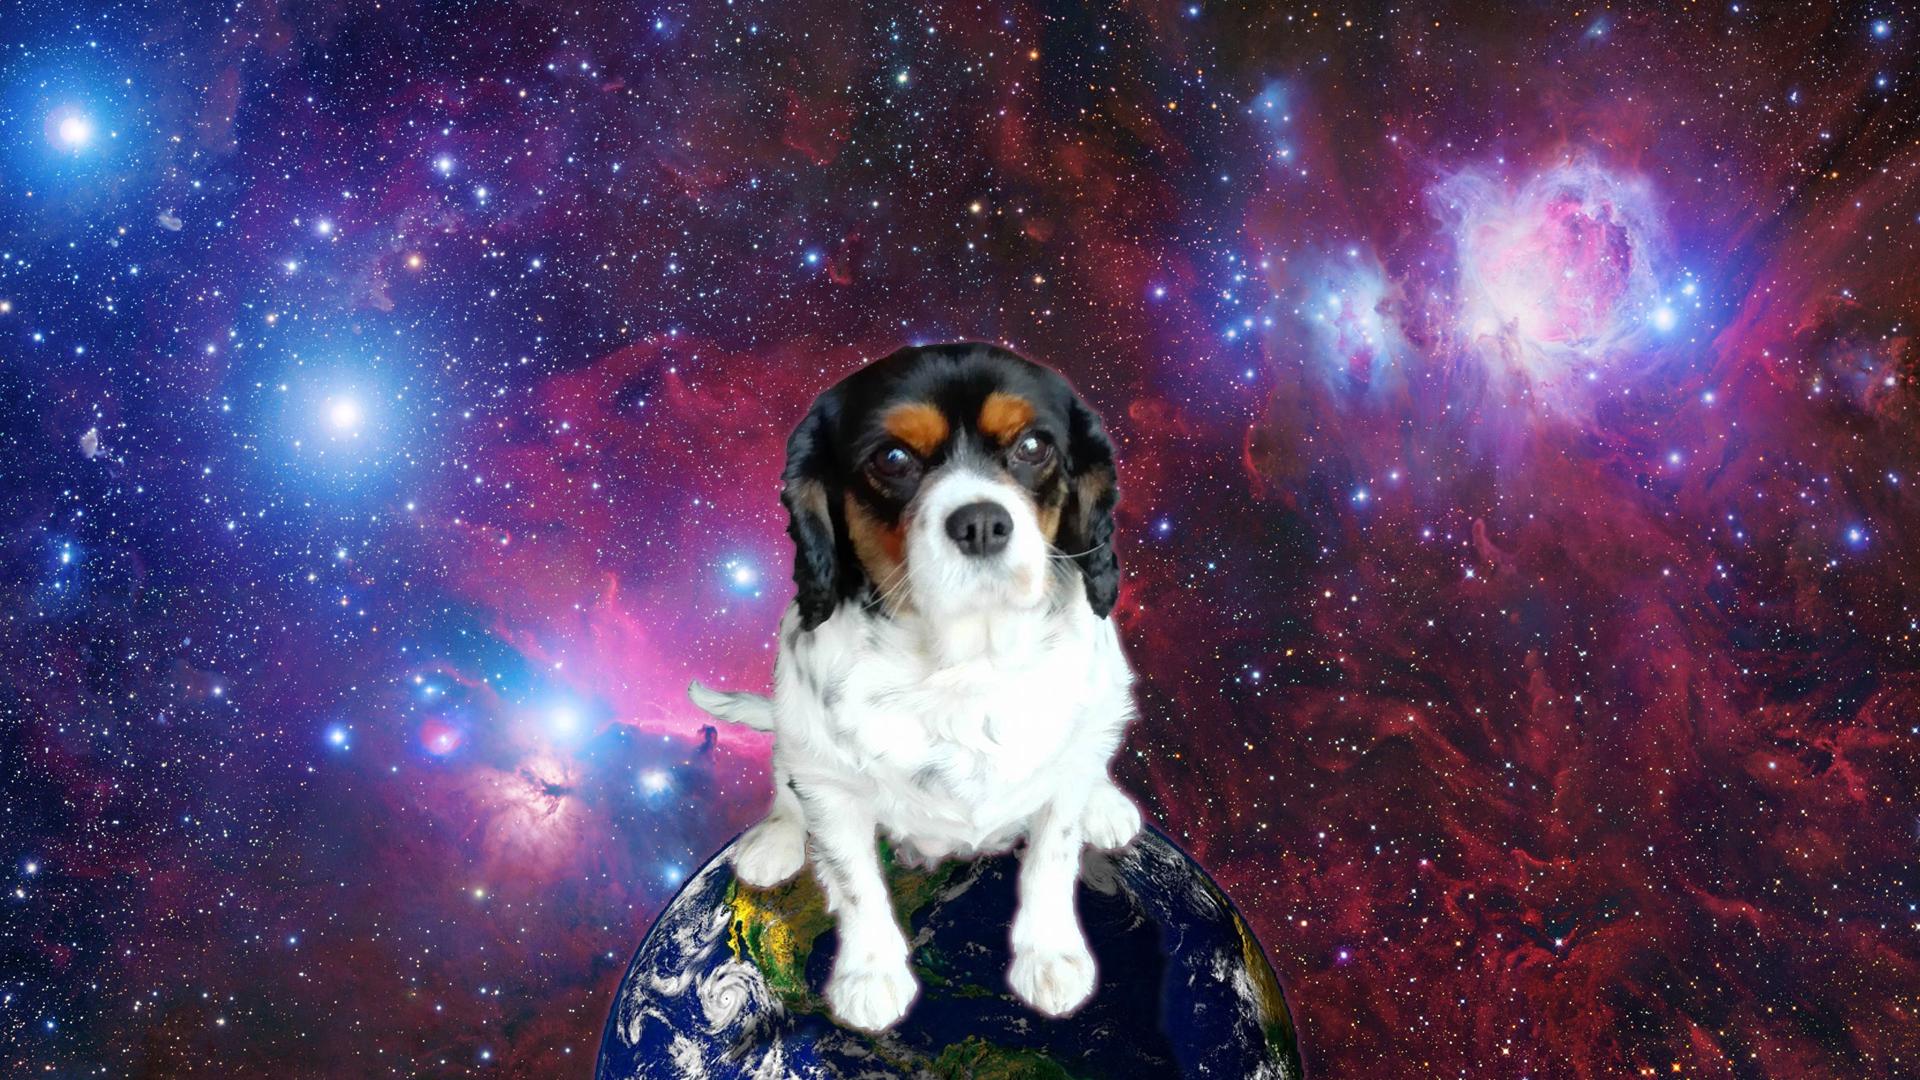 Dogs in Space Wallpaper. Beautiful Dogs Wallpaper, Dogs Valentine Wallpaper and Dangerous Dogs Wallpaper